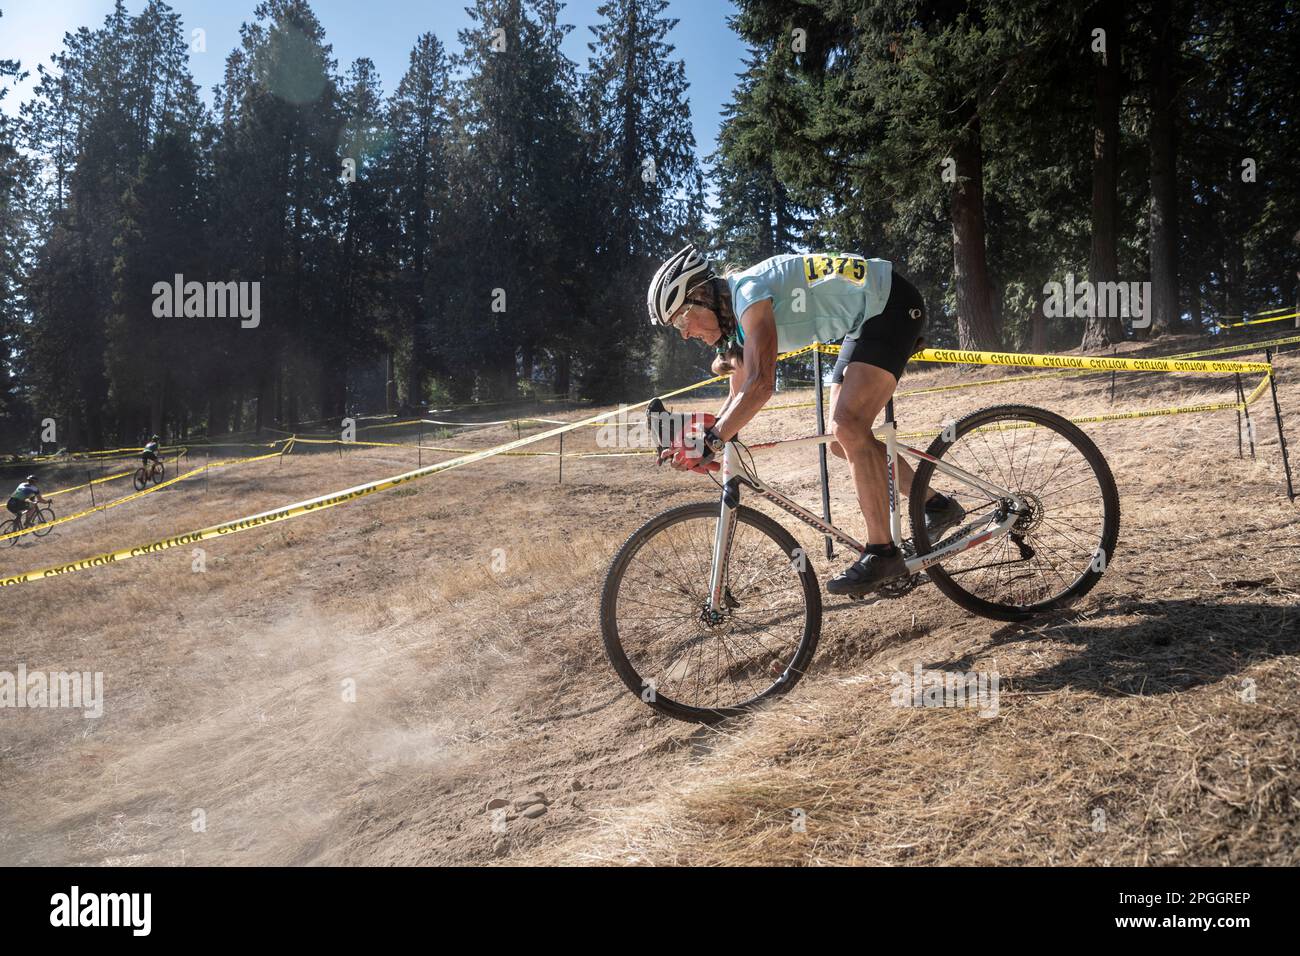 WA240445-00....Washington - Senior citizen (69 years) Vicky Spring compeating in a cyclocross race in Western Washington. Stock Photo